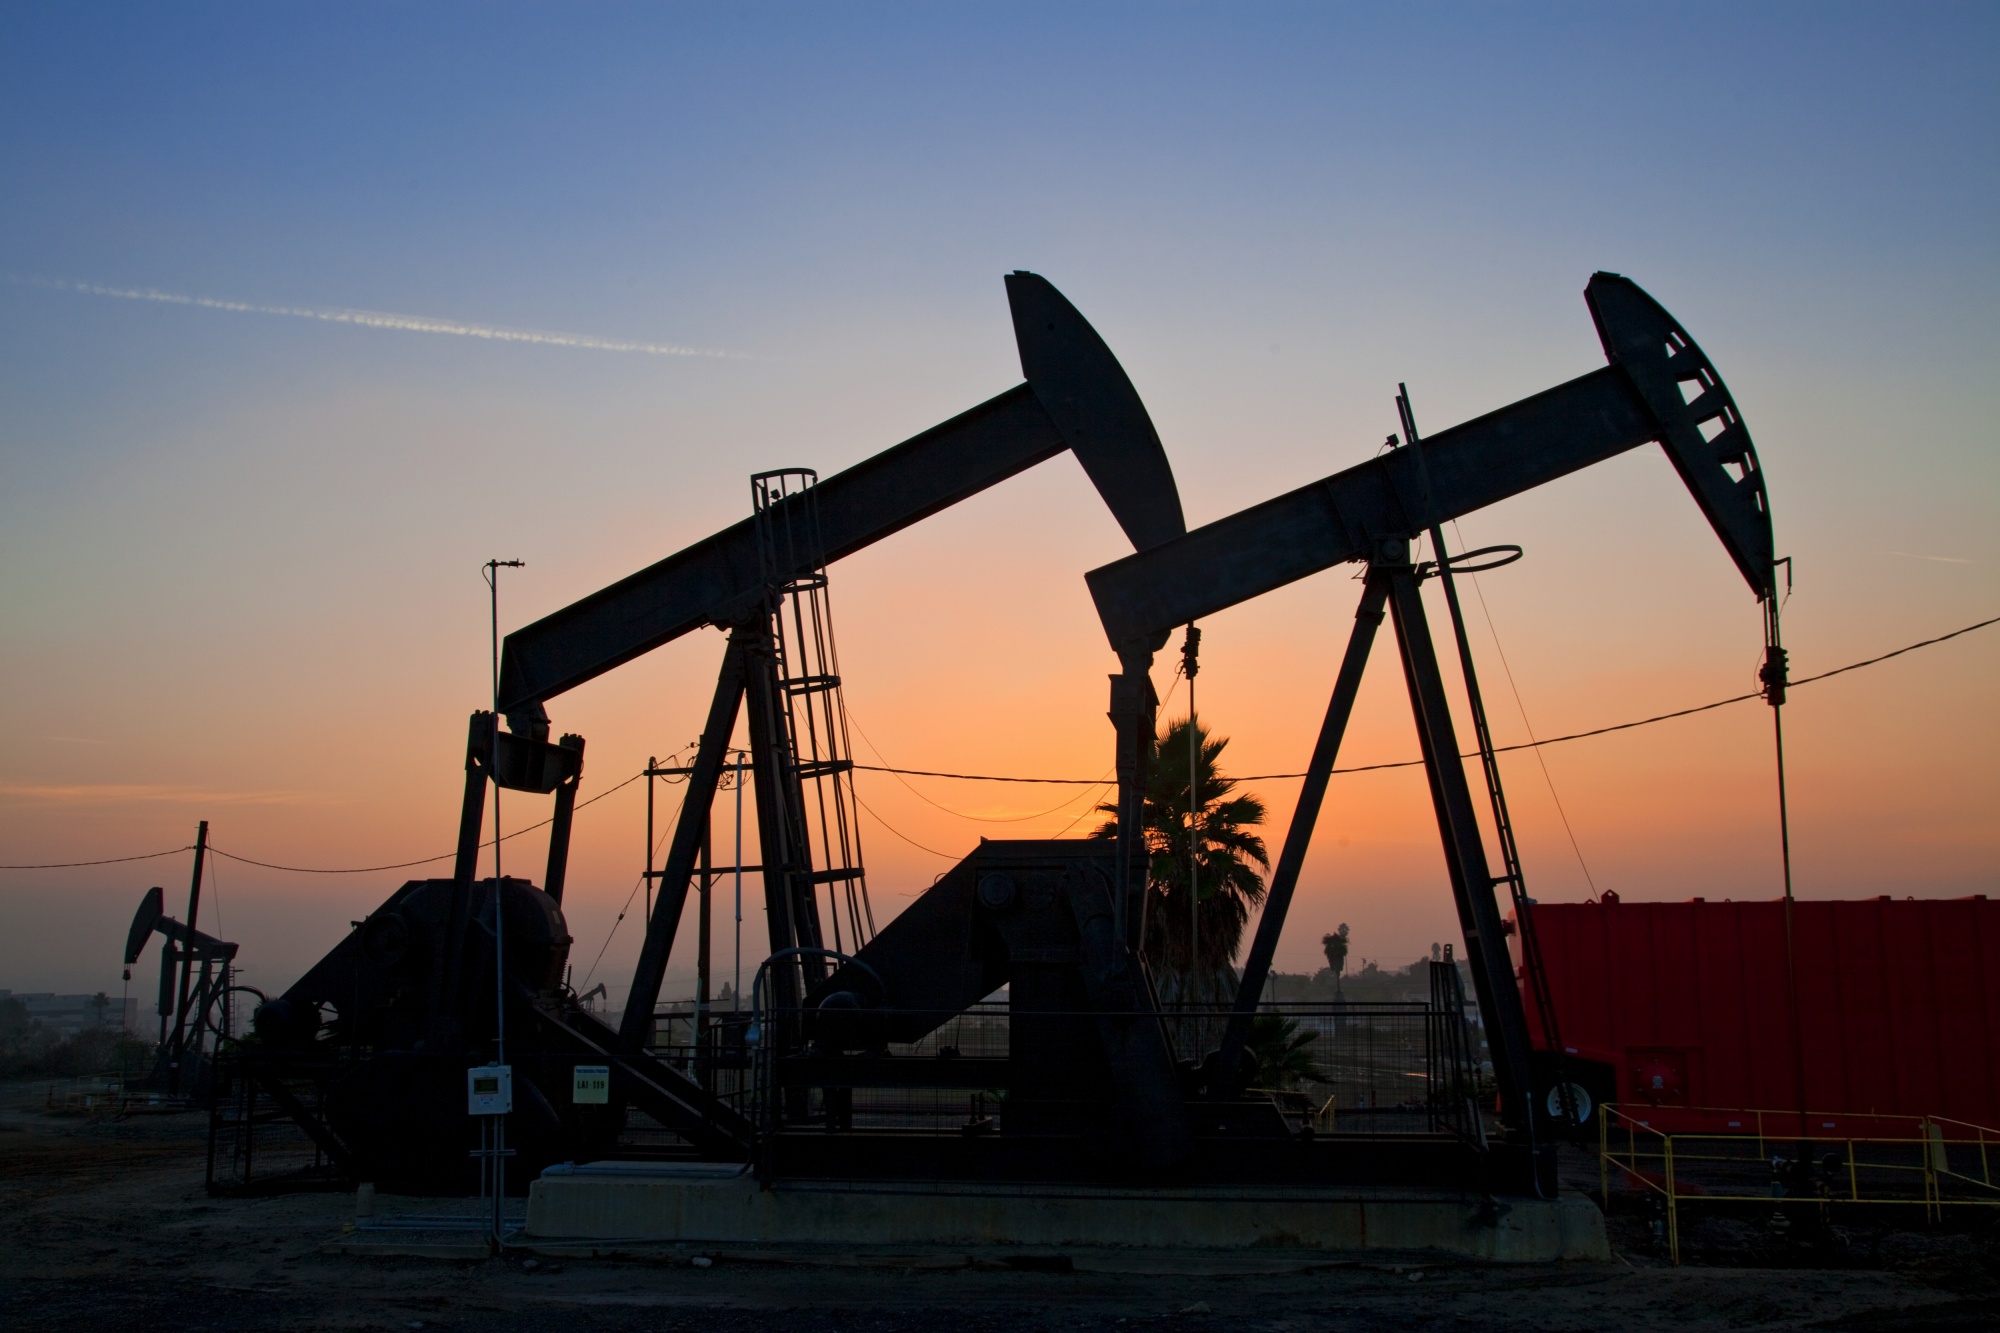 Among the areas where drilling will end is the 1,000-acre Inglewood Oil Field.&nbsp;